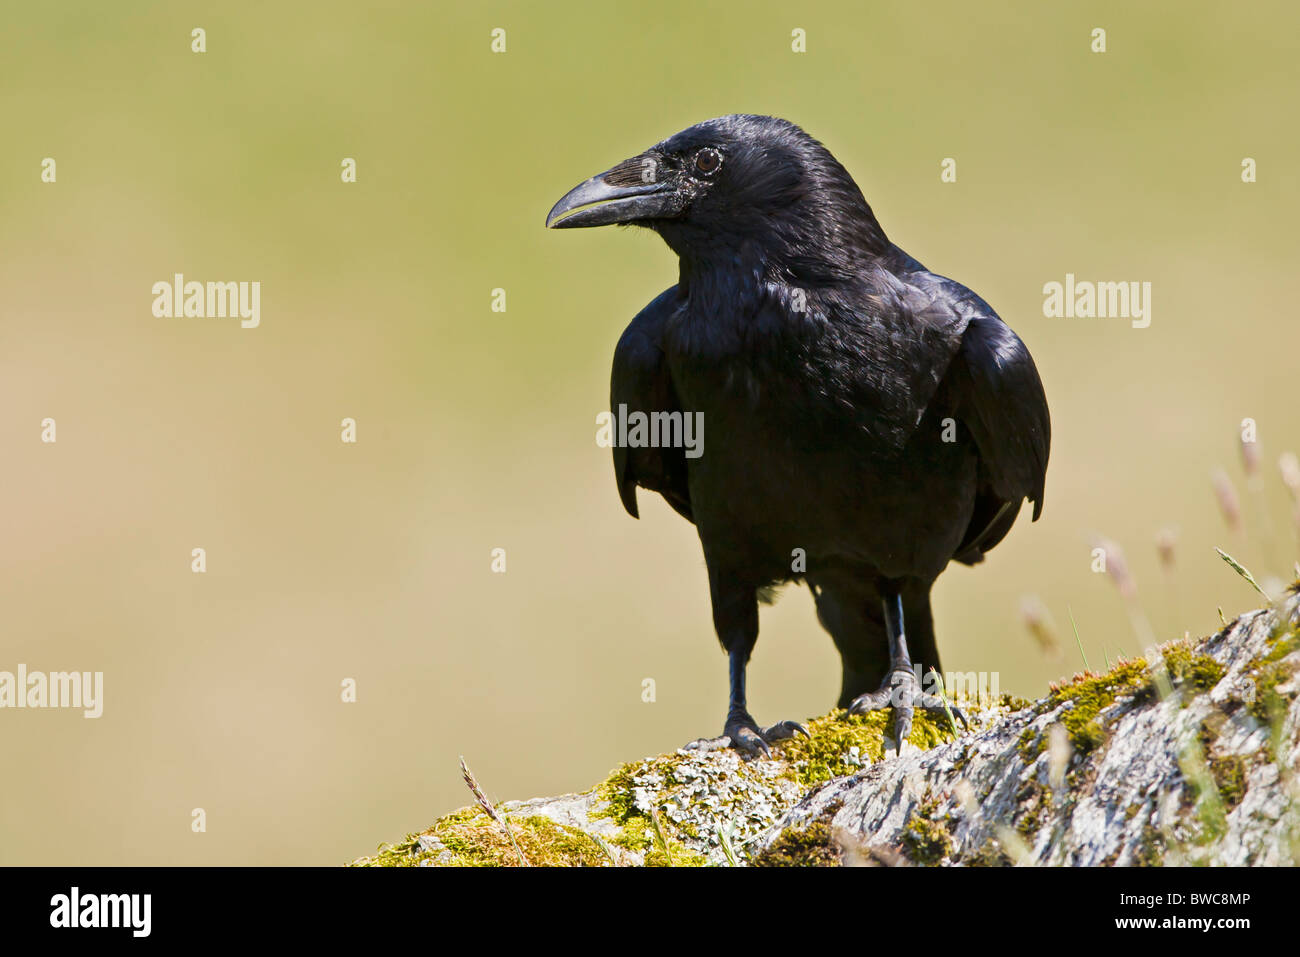 CARRION CROW ON A MOSS COVERED ROCK Stock Photo